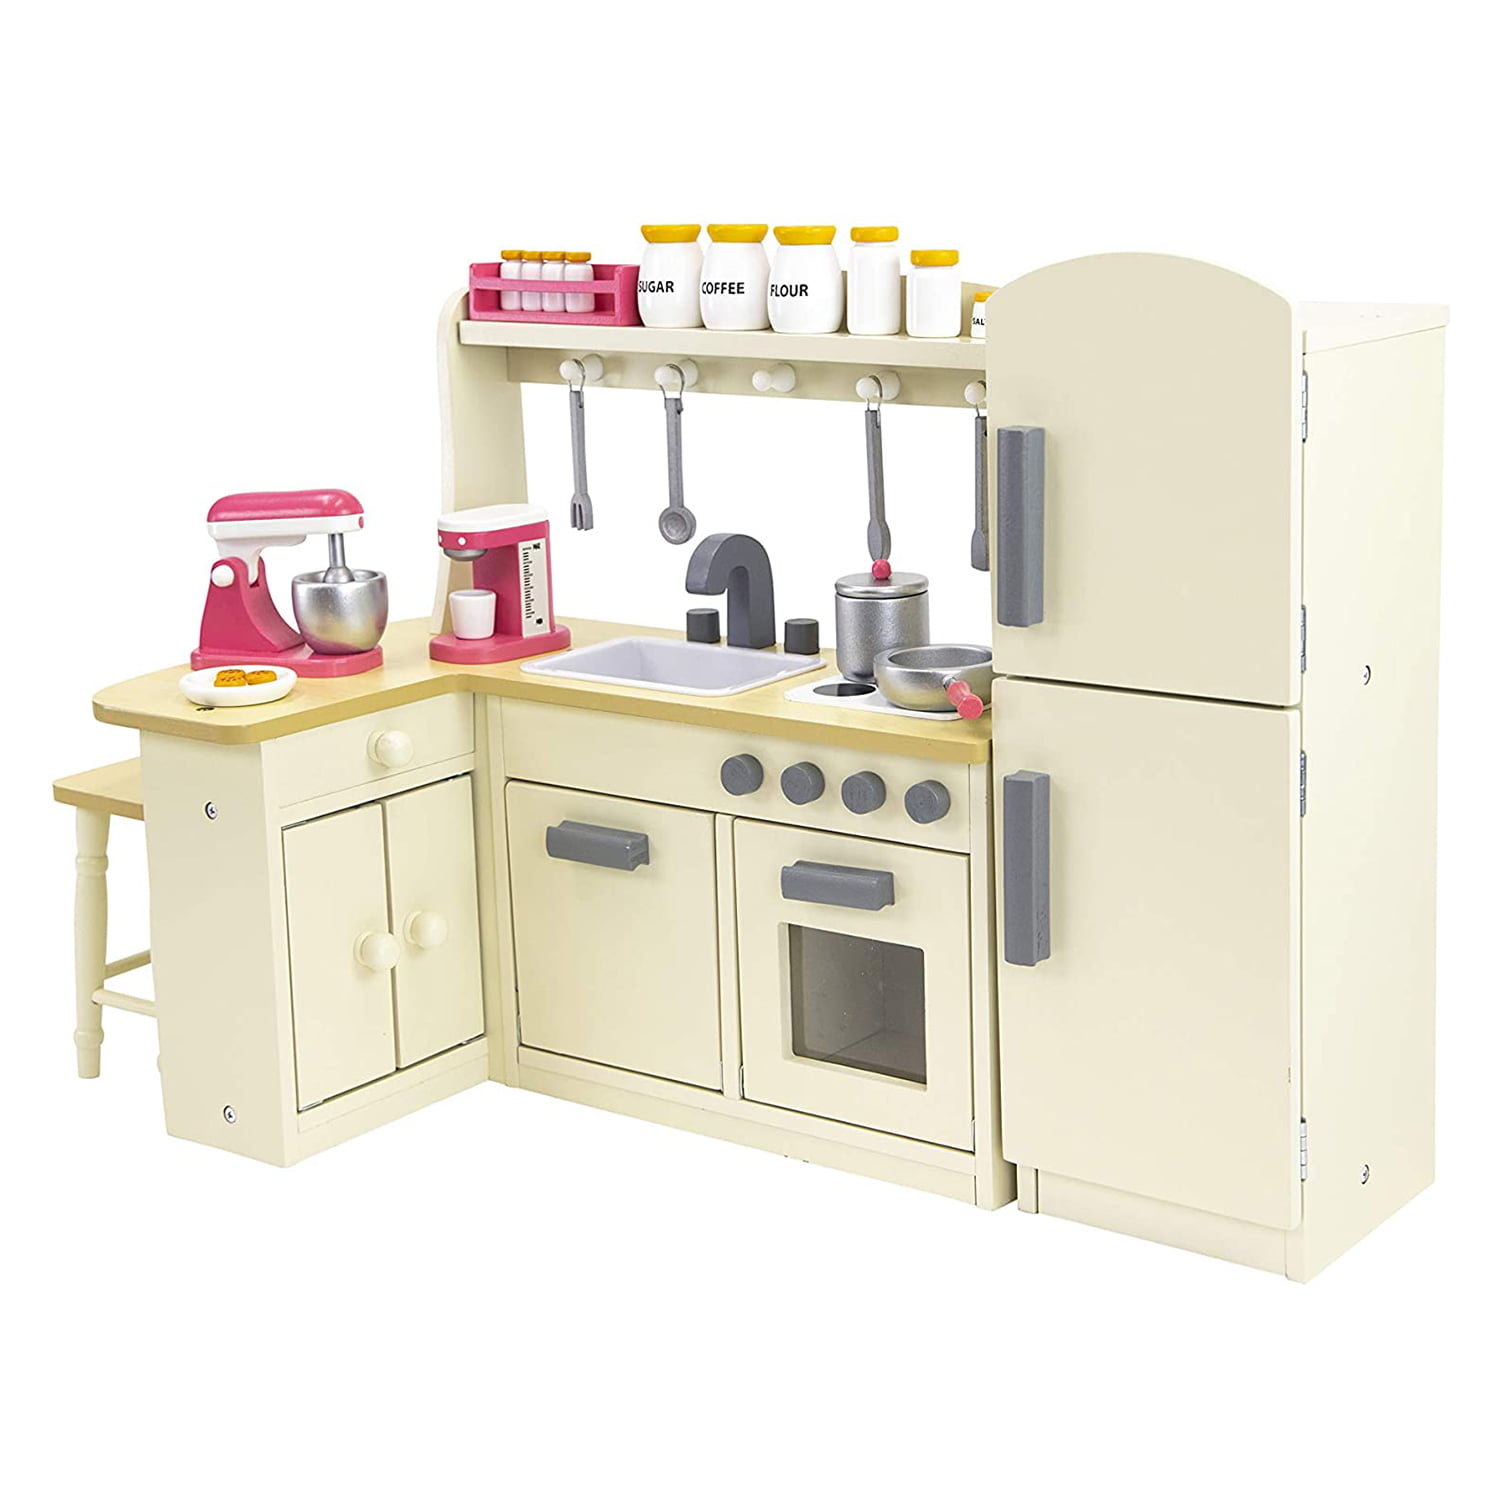 Little House Wood Cook Stove, Furniture for 18-Inch Dolls